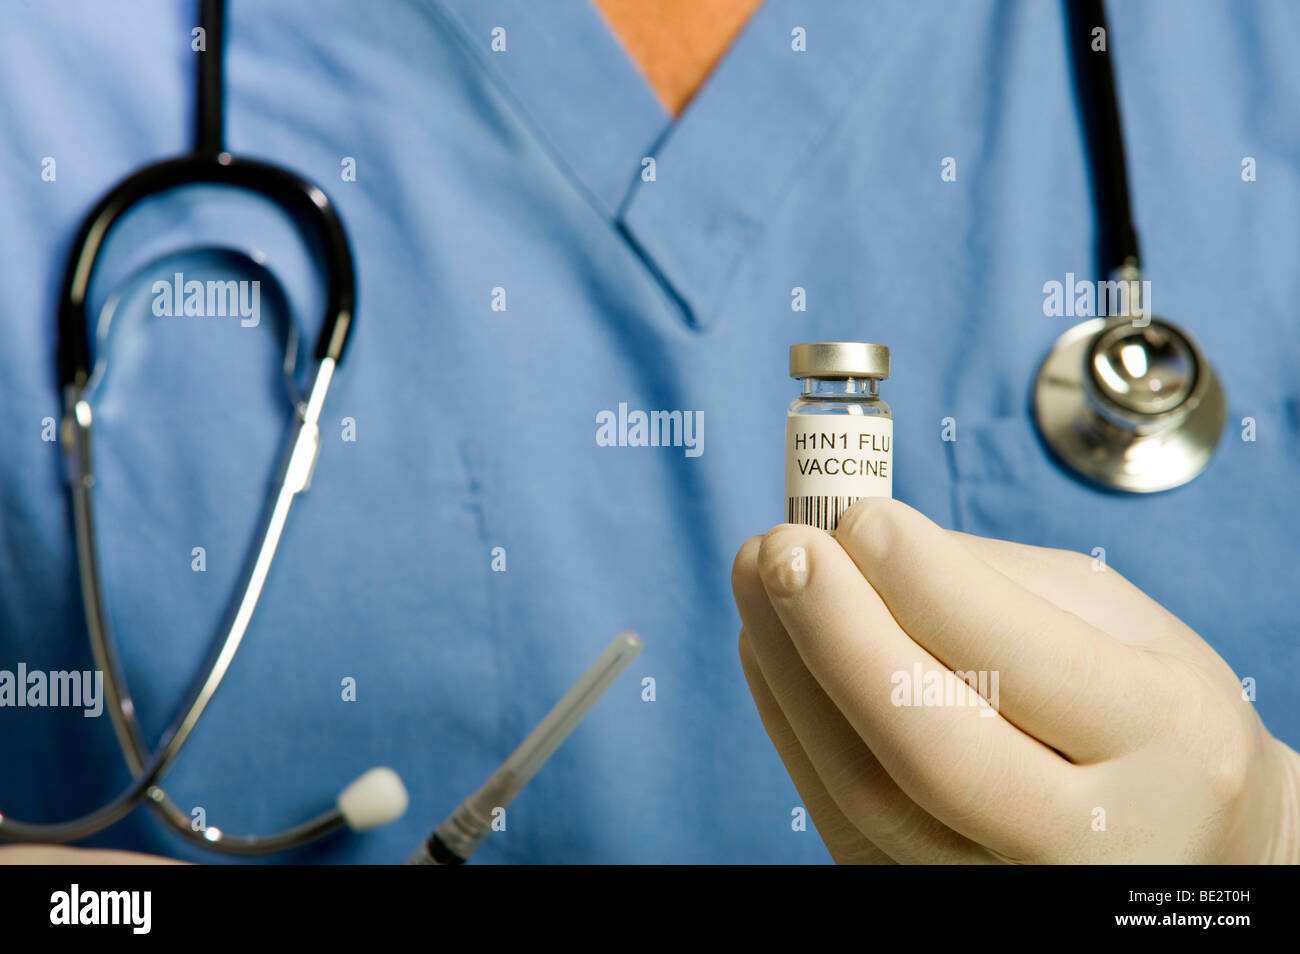 Male doctor or nurse wearing blue scrubs, stethoscope and gloves holding vial of H1N1 Swine Flu vaccine and syringe. Stock Photo